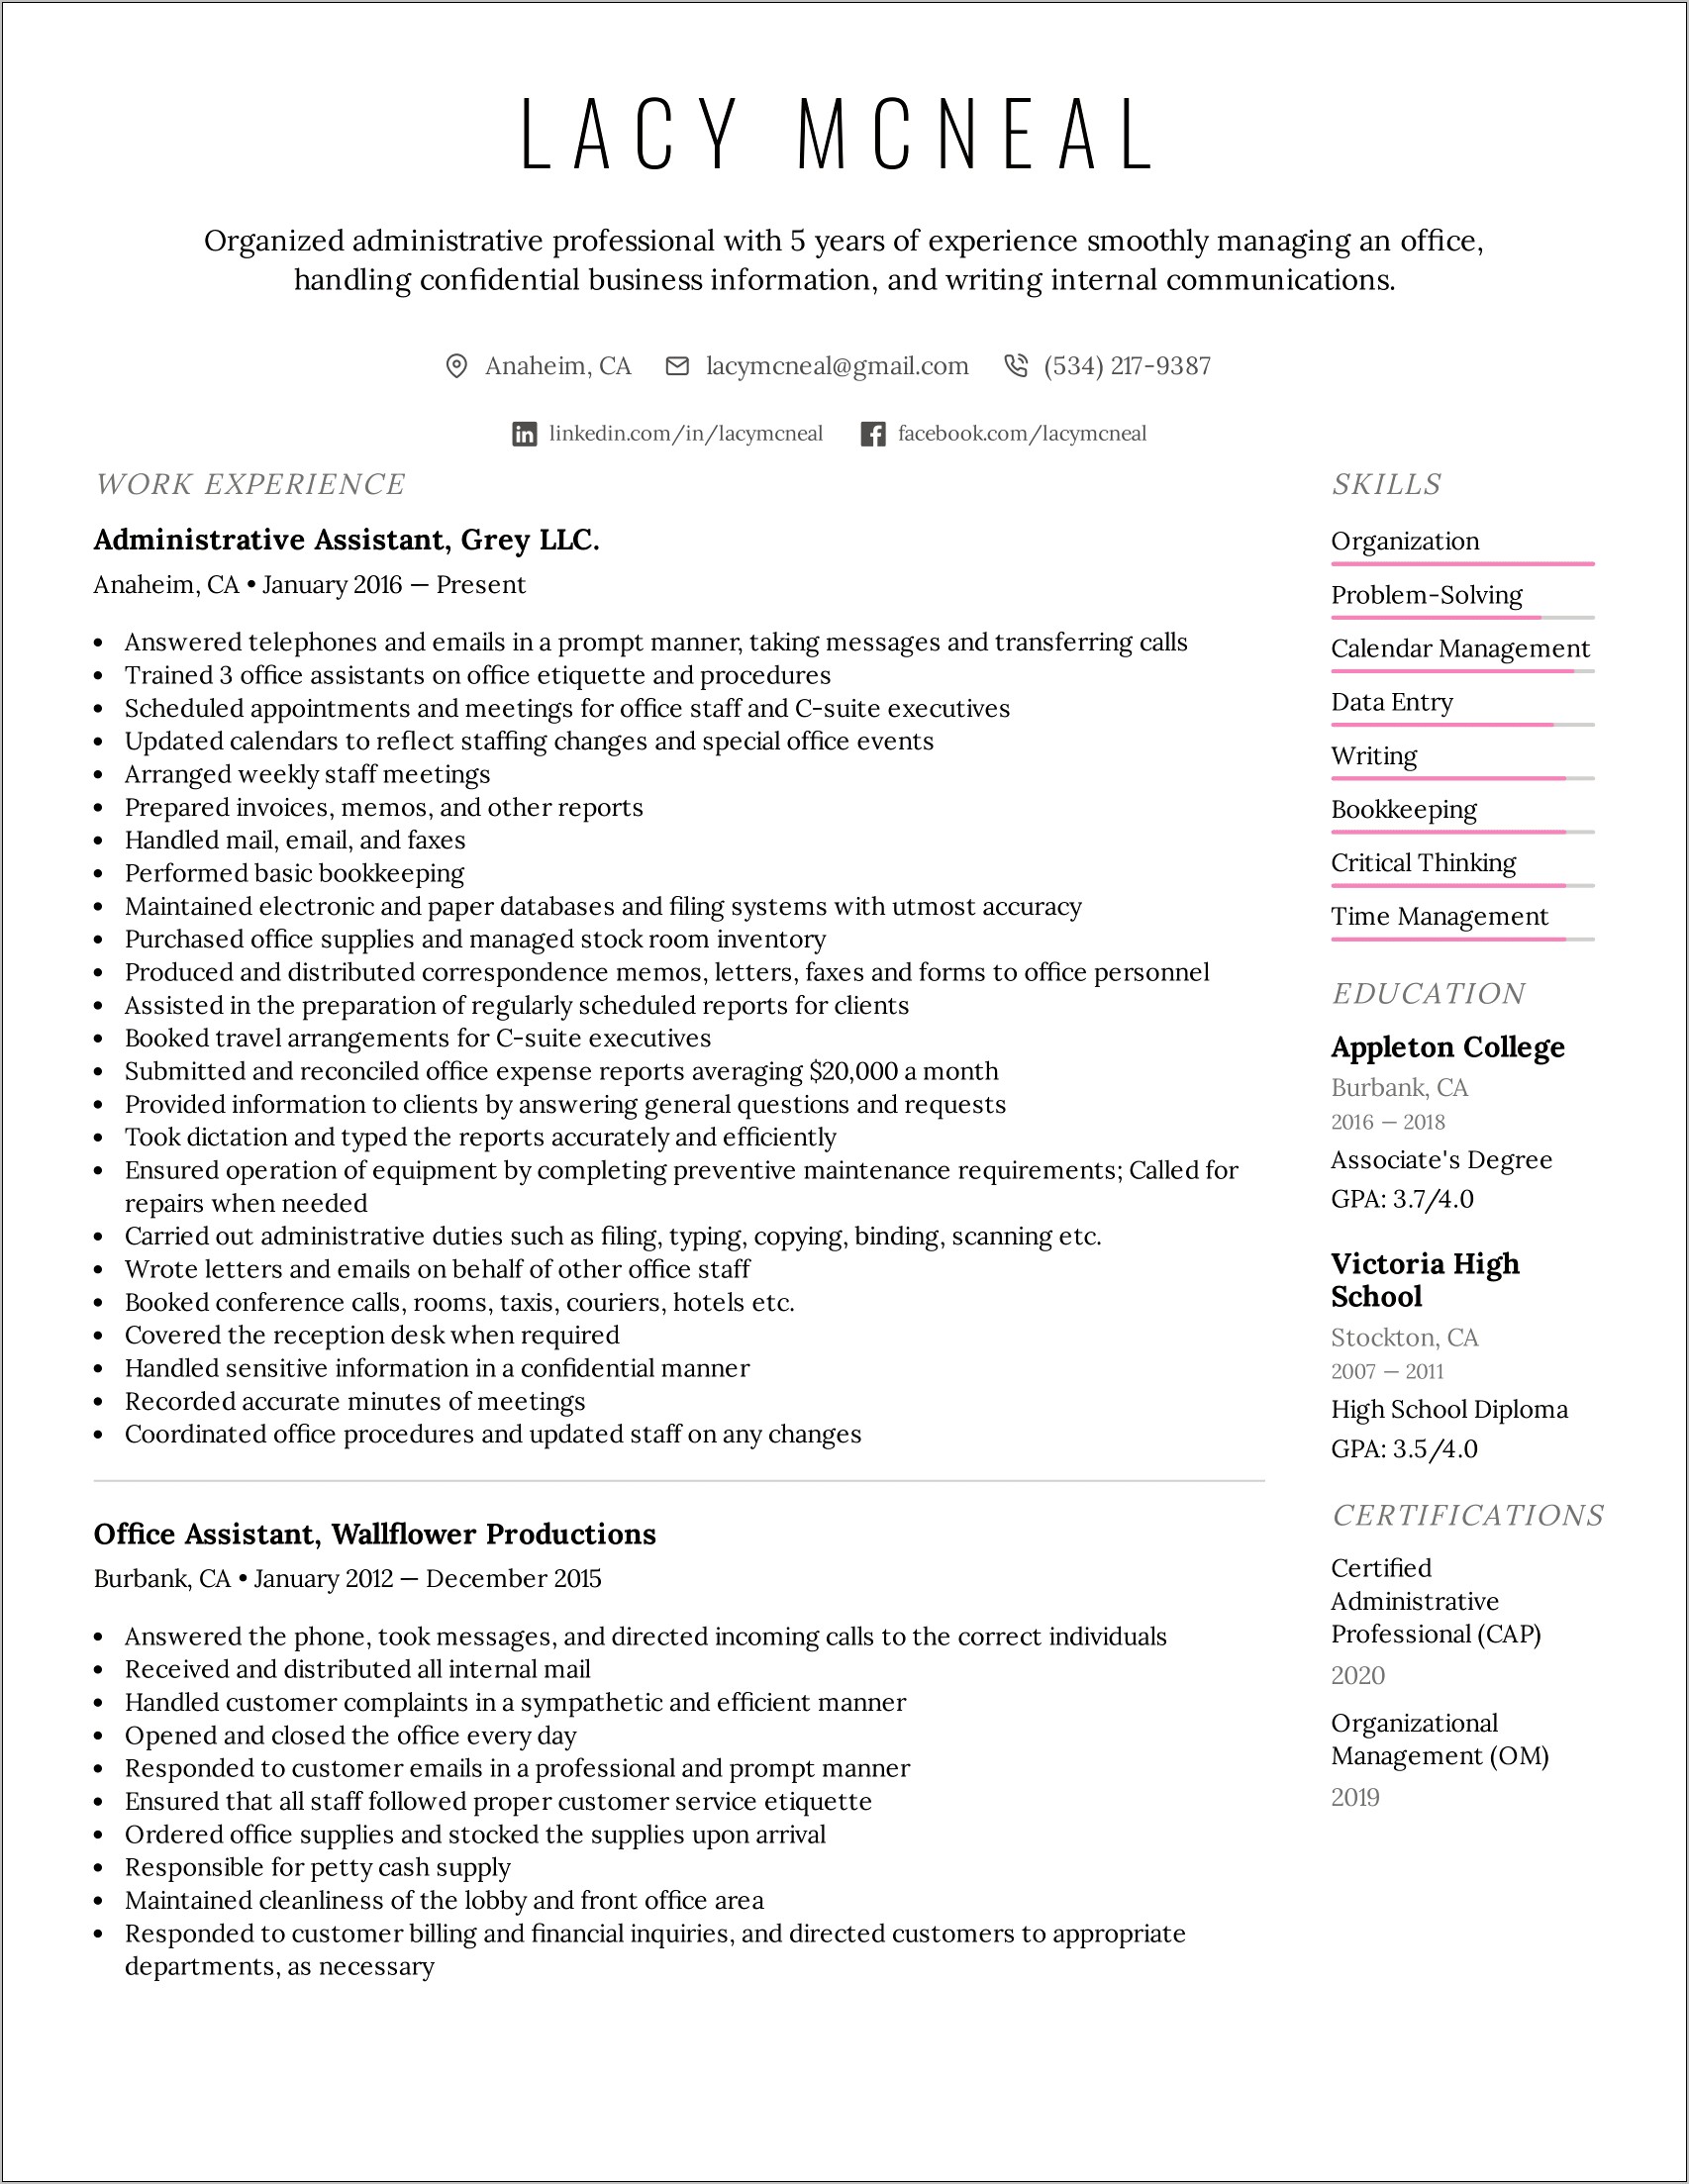 Data Entry Administrative Assistant Resume With Little Experience